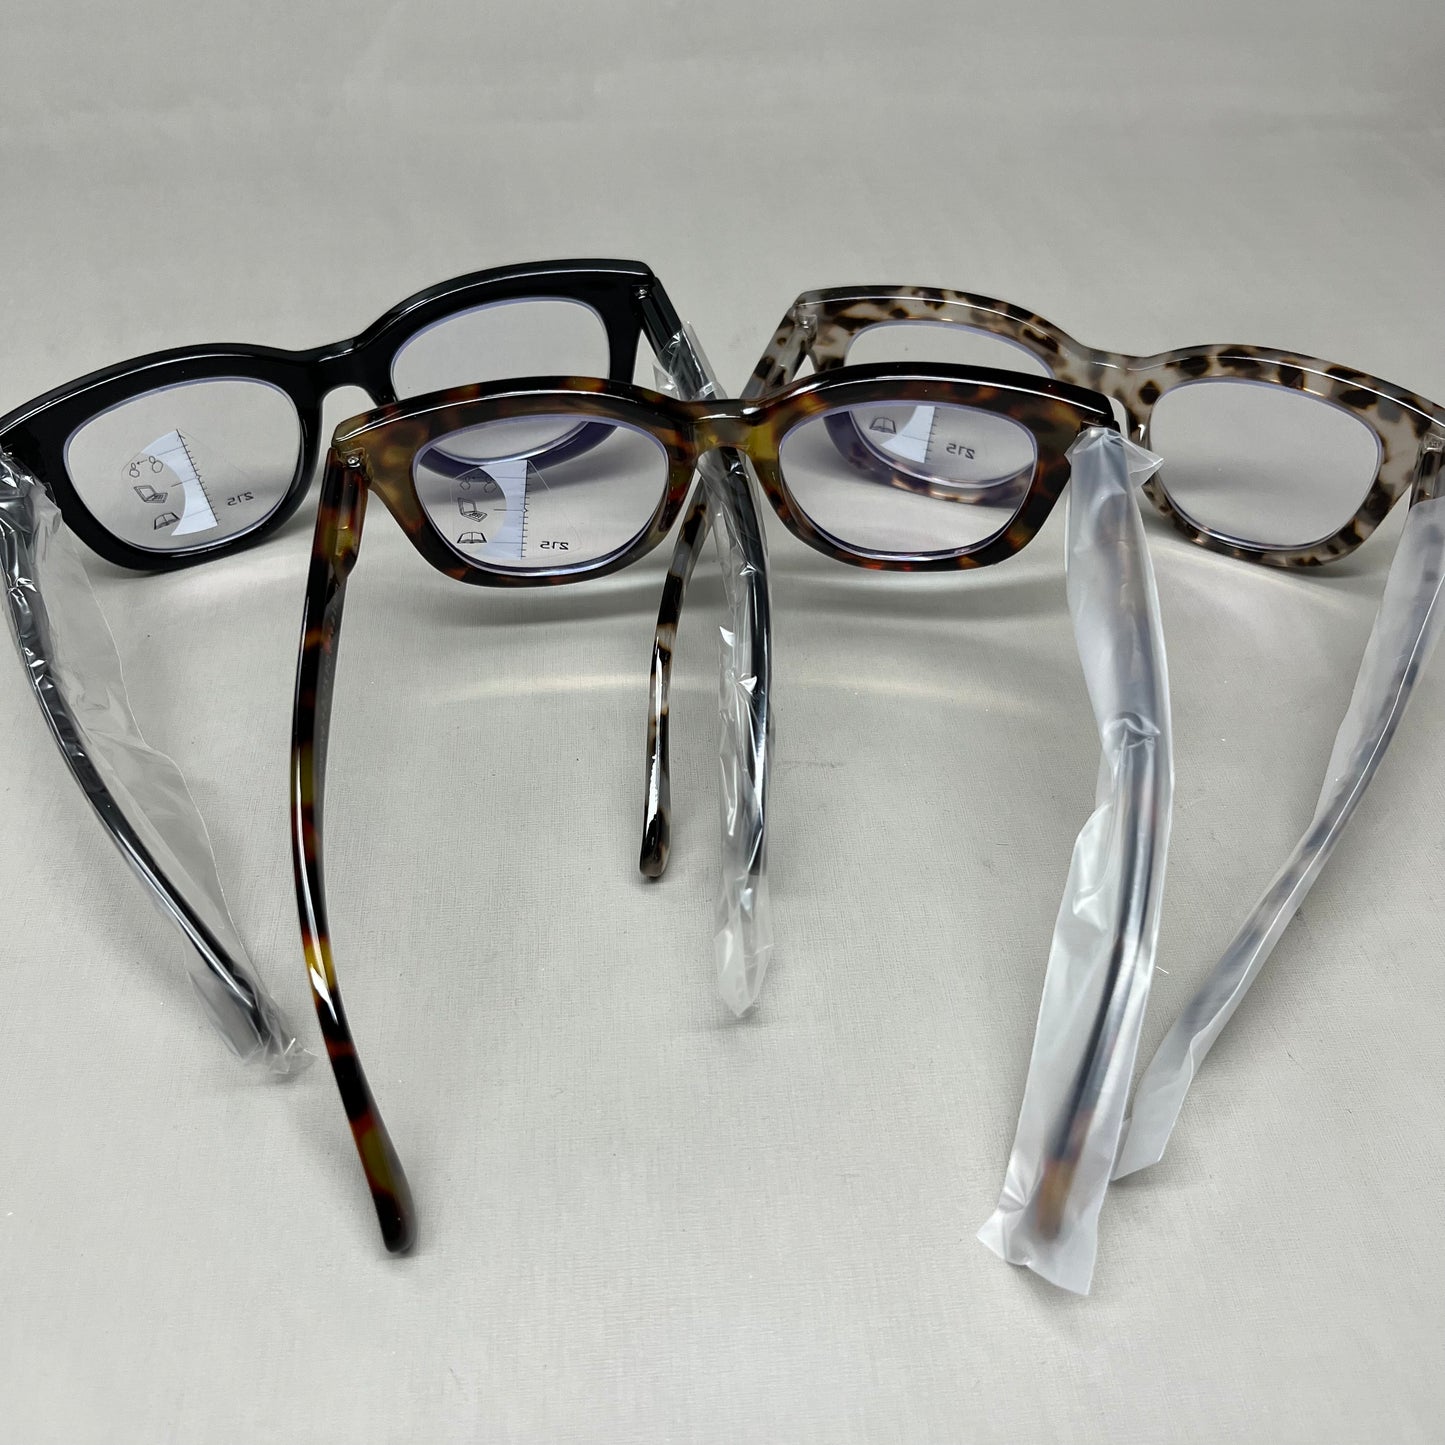 ZXYOO 3 Pack Classic Retro Reading Glasses 3.5x Magnification Strength (New)